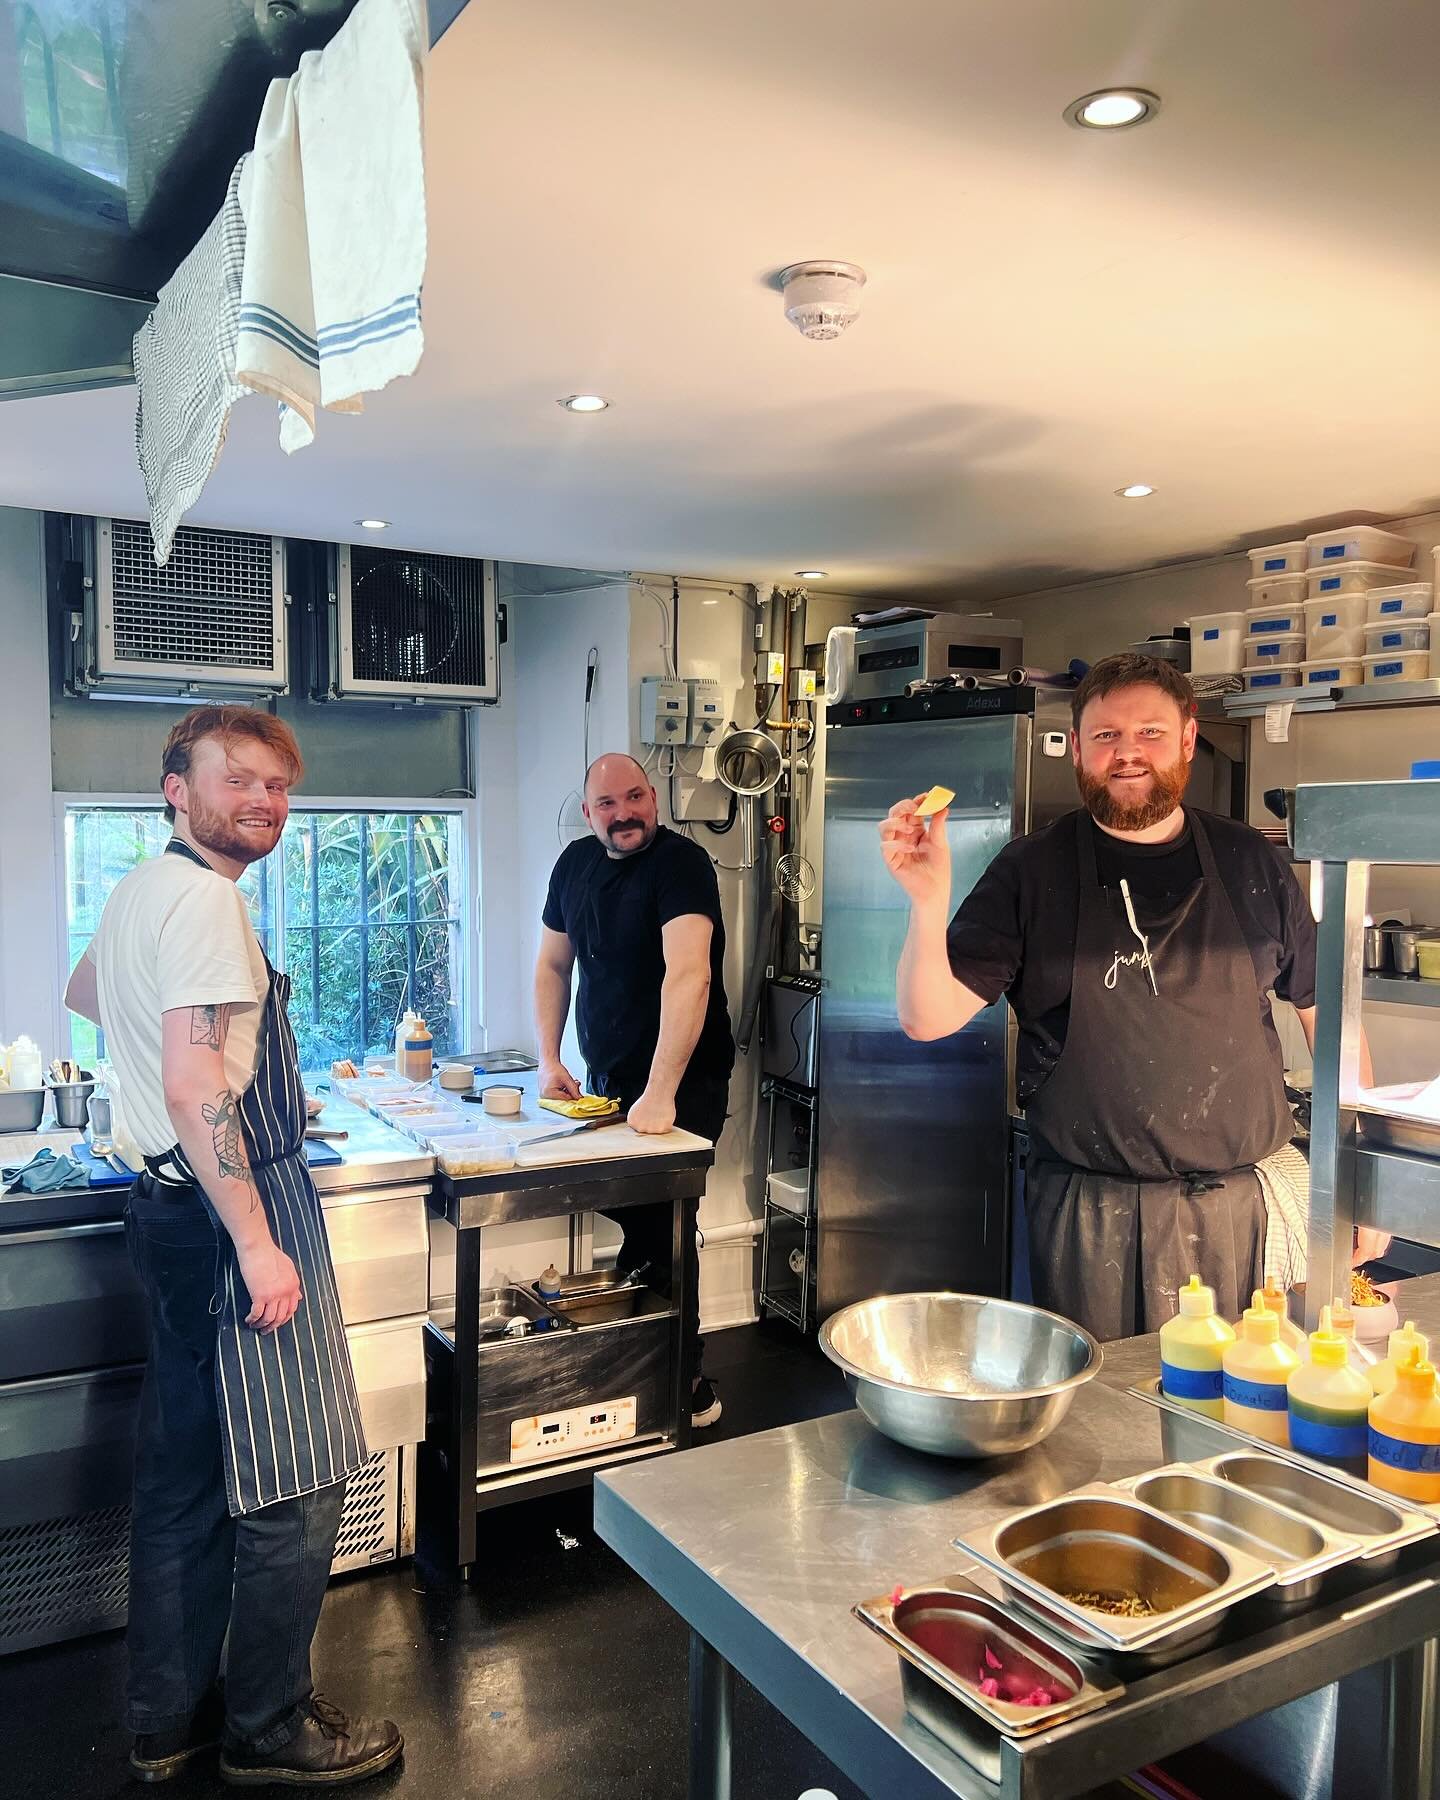 Hi 👋 Hope you&rsquo;re having a fabulous week so far! 

Here&rsquo;s a few photos from ours :) Some of us, some from the menu, and some tasty specials we&rsquo;ve had on. 

P.S Stu&rsquo;s trying to say &lsquo;Cheese&rsquo; 🙃

Anyway, Come and see 